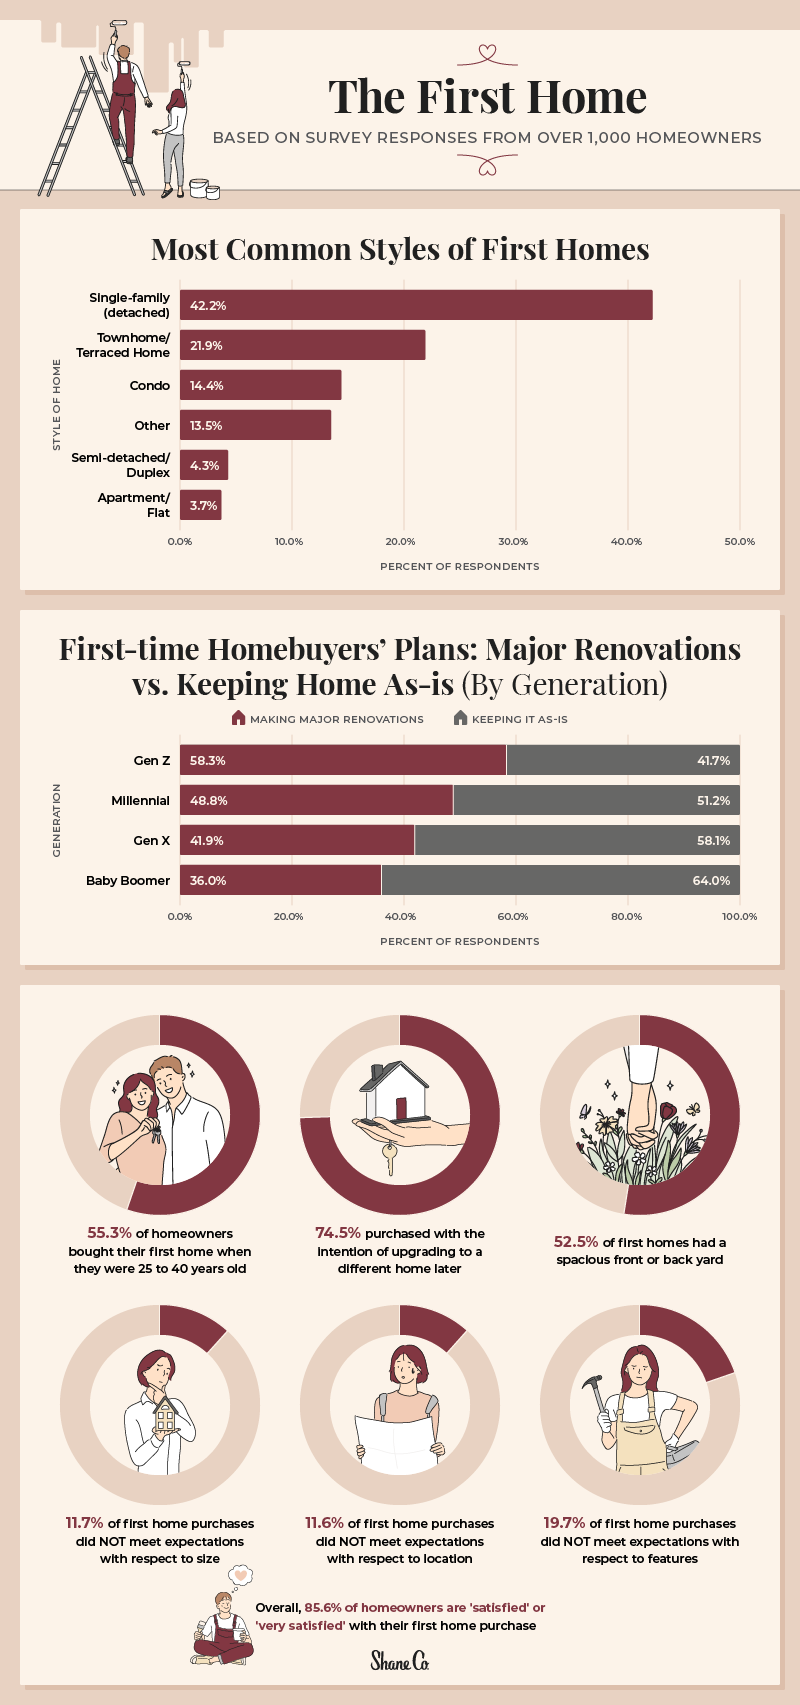 A graphic showing statistics related to the first home purchases of survey respondents 